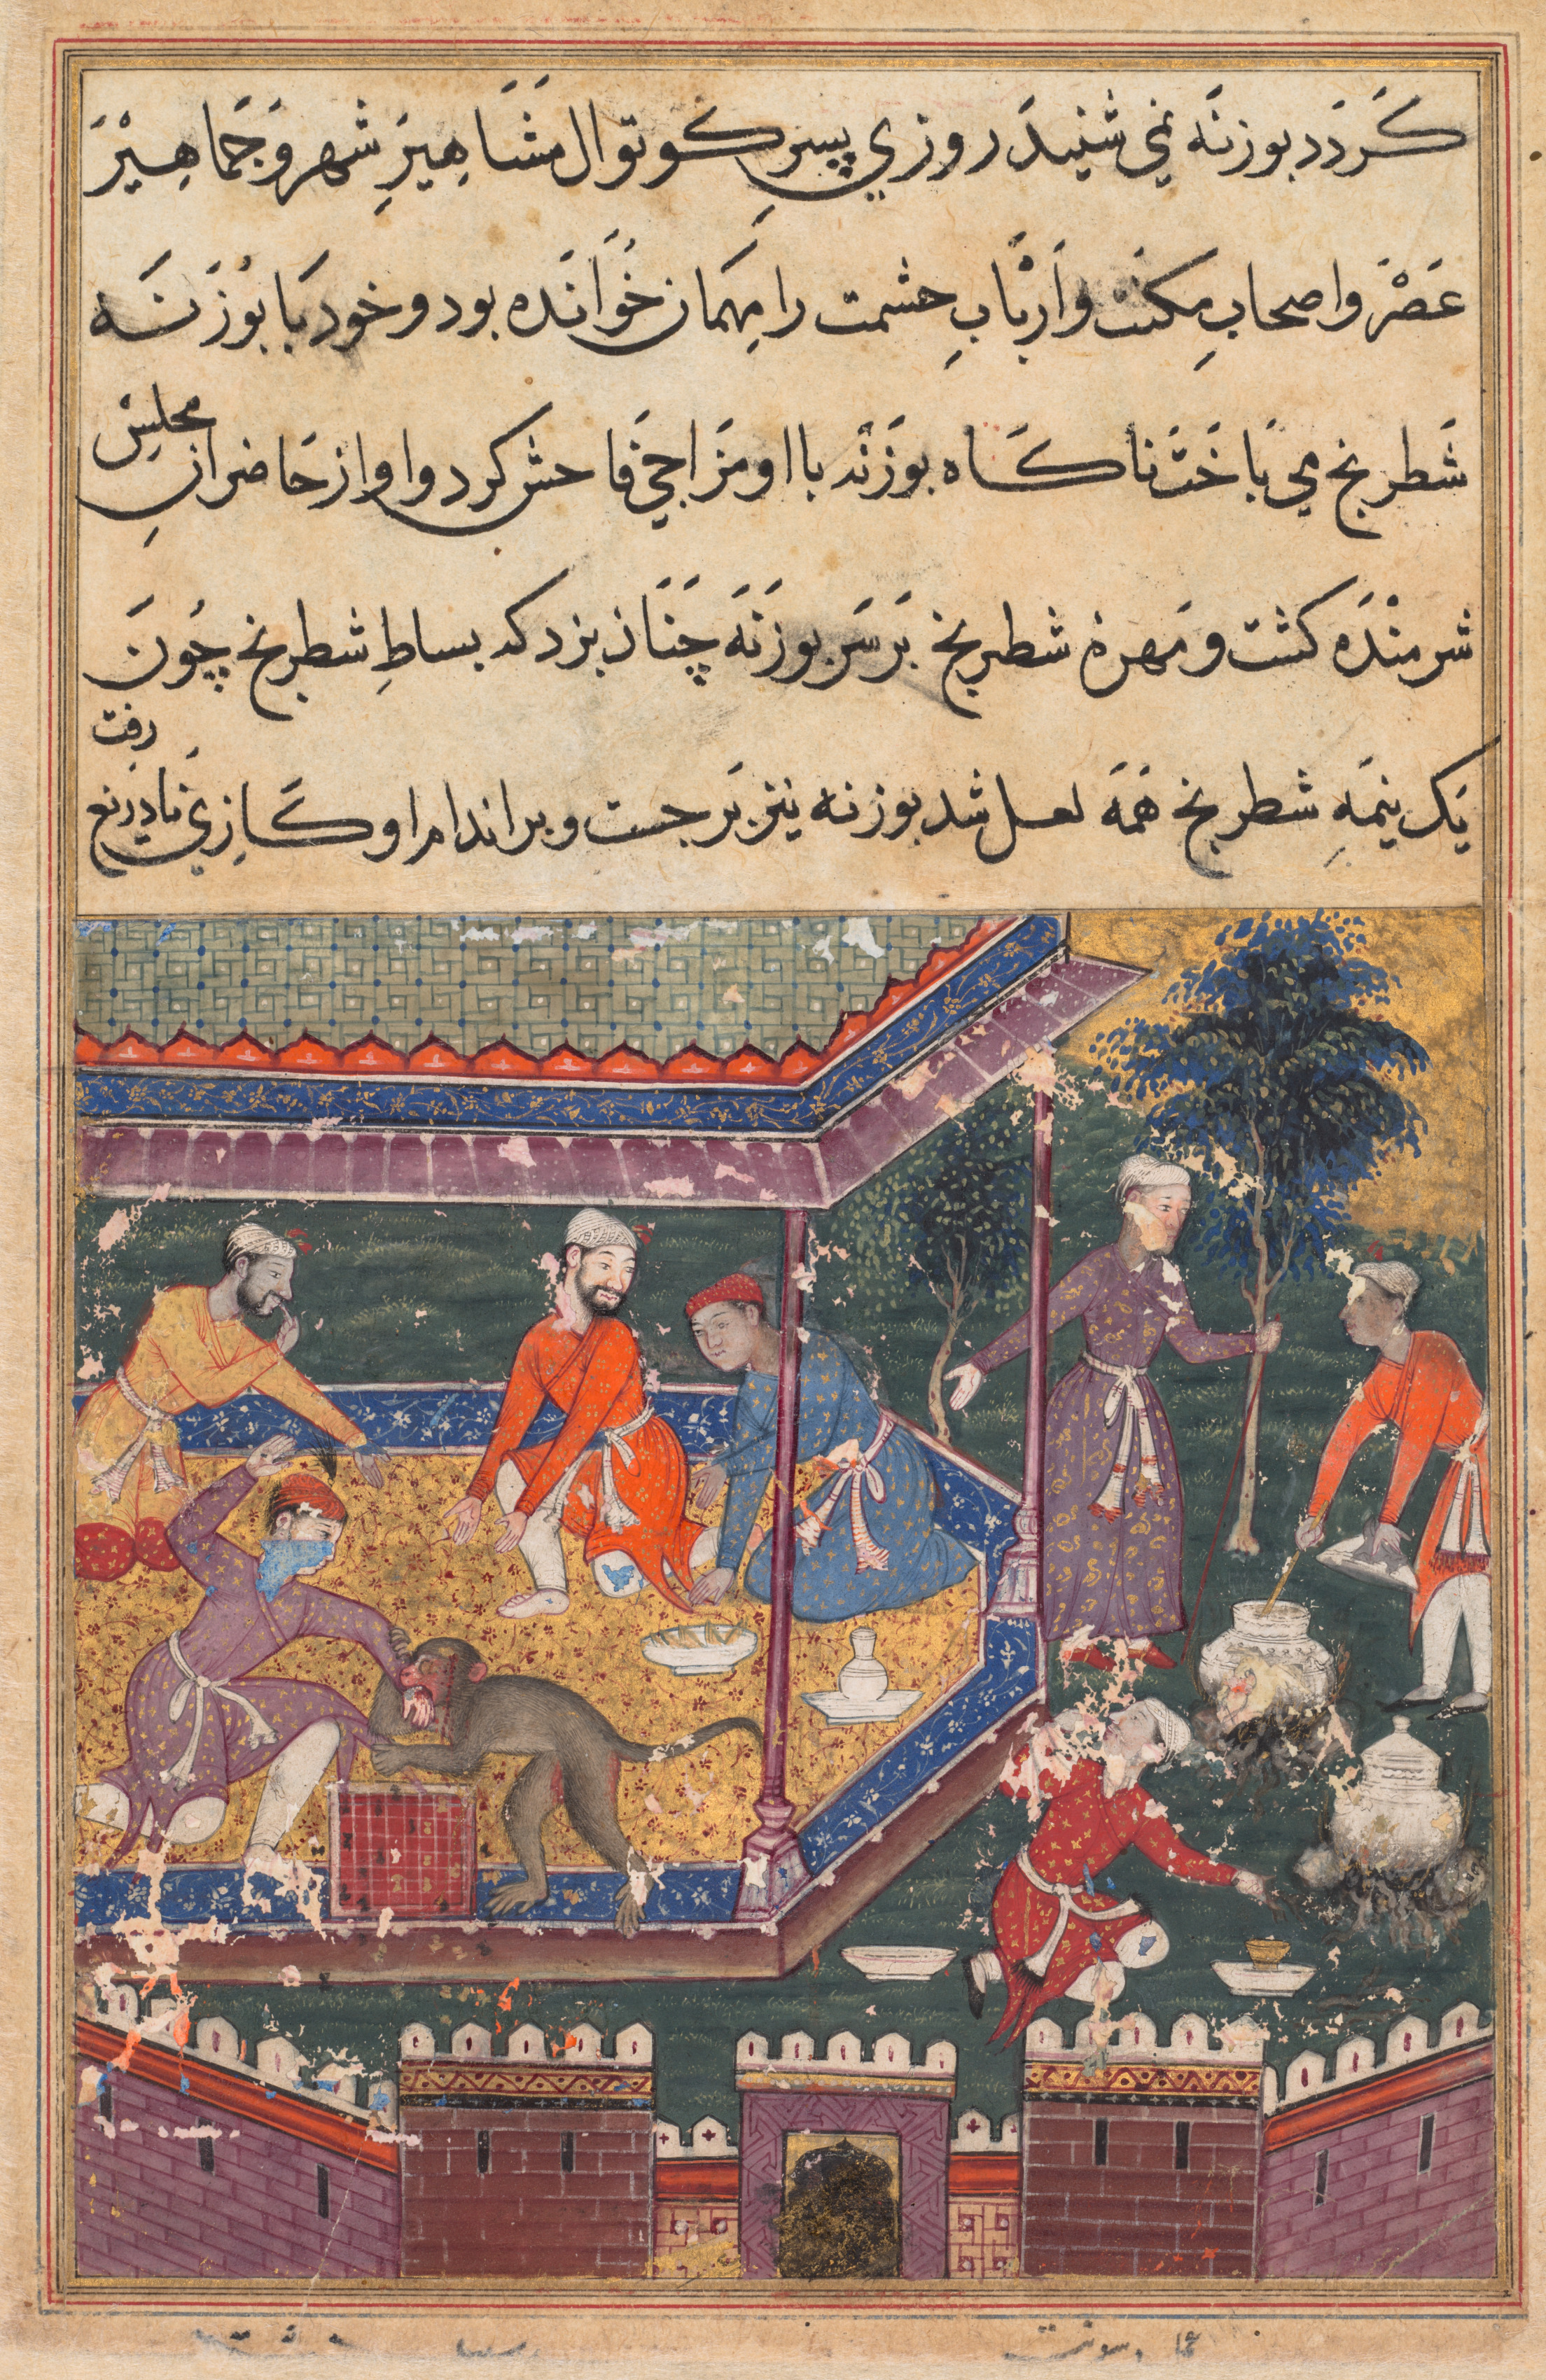 The wounded monkey bites the hand of the prince, his chessmate, in the presence of guests, from a Tuti-nama (Tales of a Parrot): Fifth Night